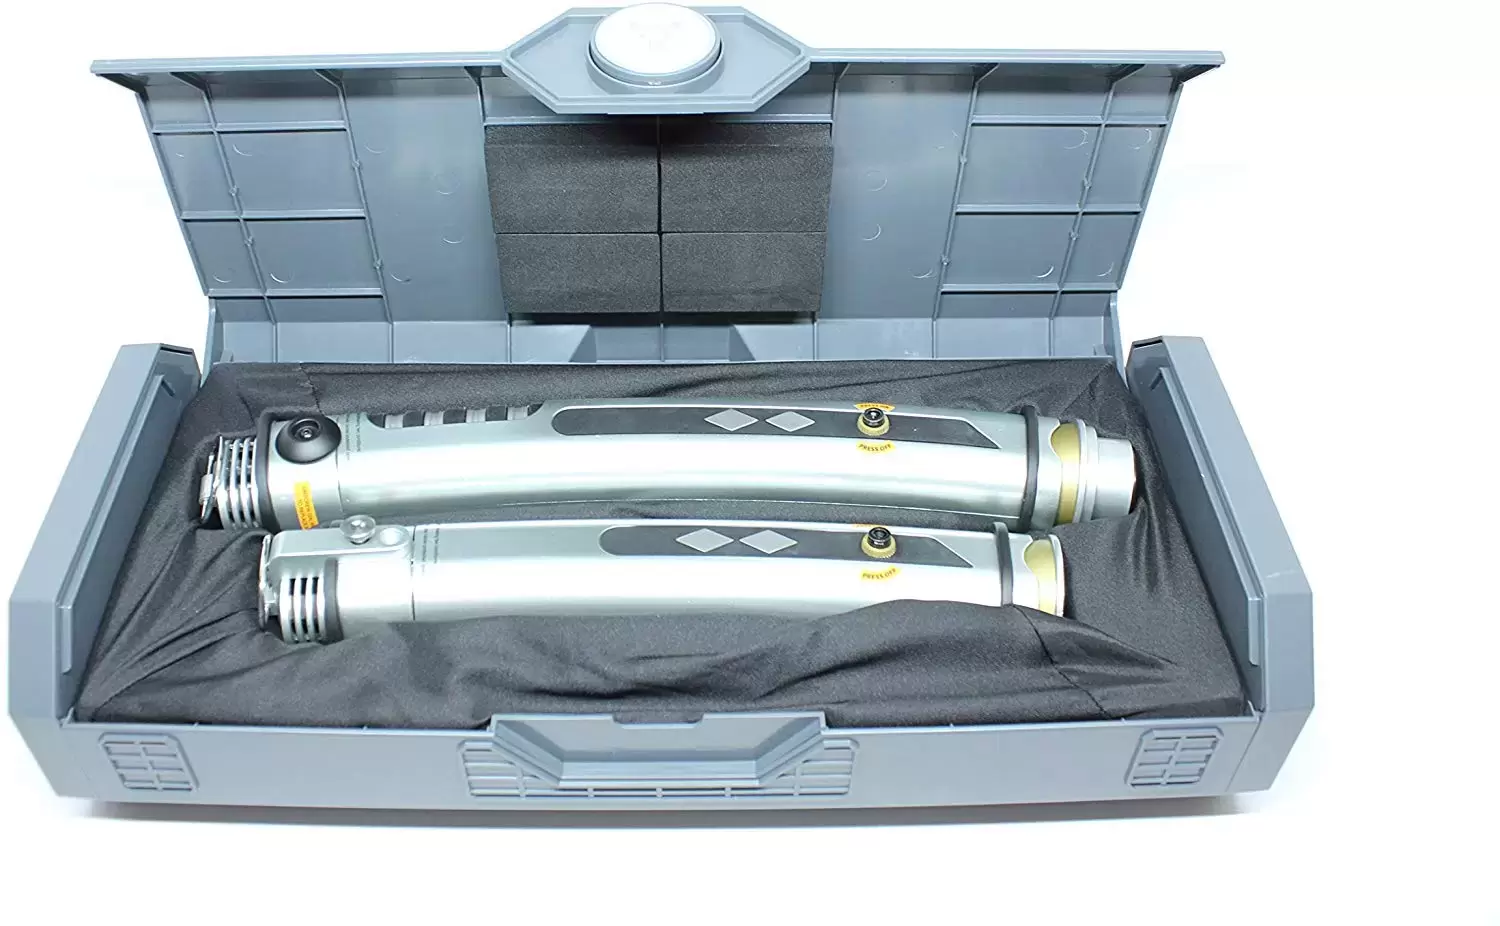 Lightsabers And Roleplay Items - Legacy Lightsaber - Ahsoka Tano [Rebels] Lightsabers